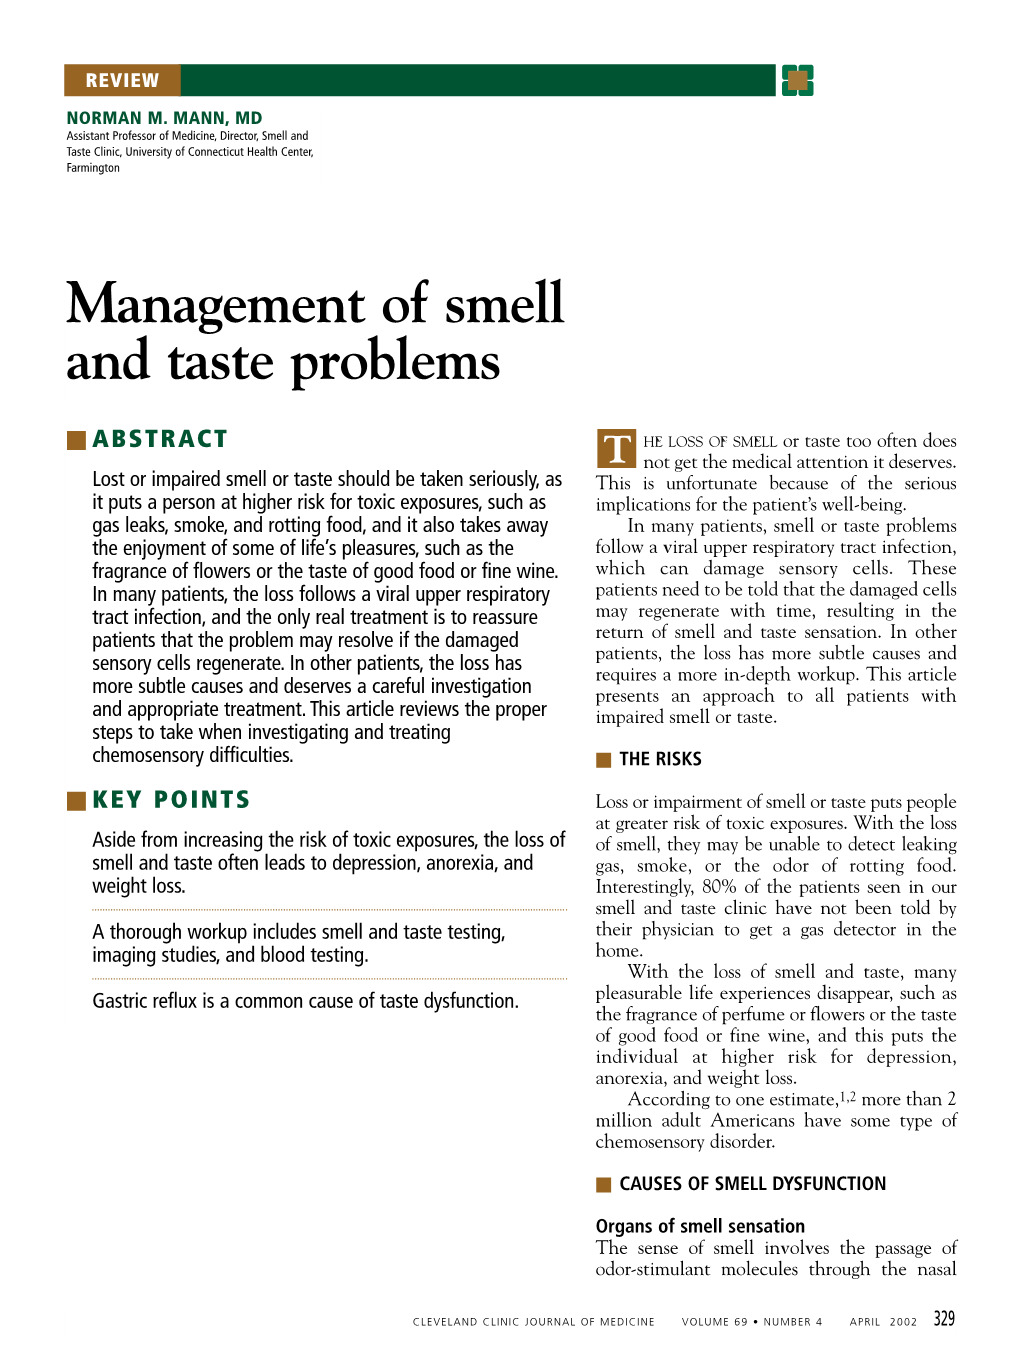 Management of Smell and Taste Problems